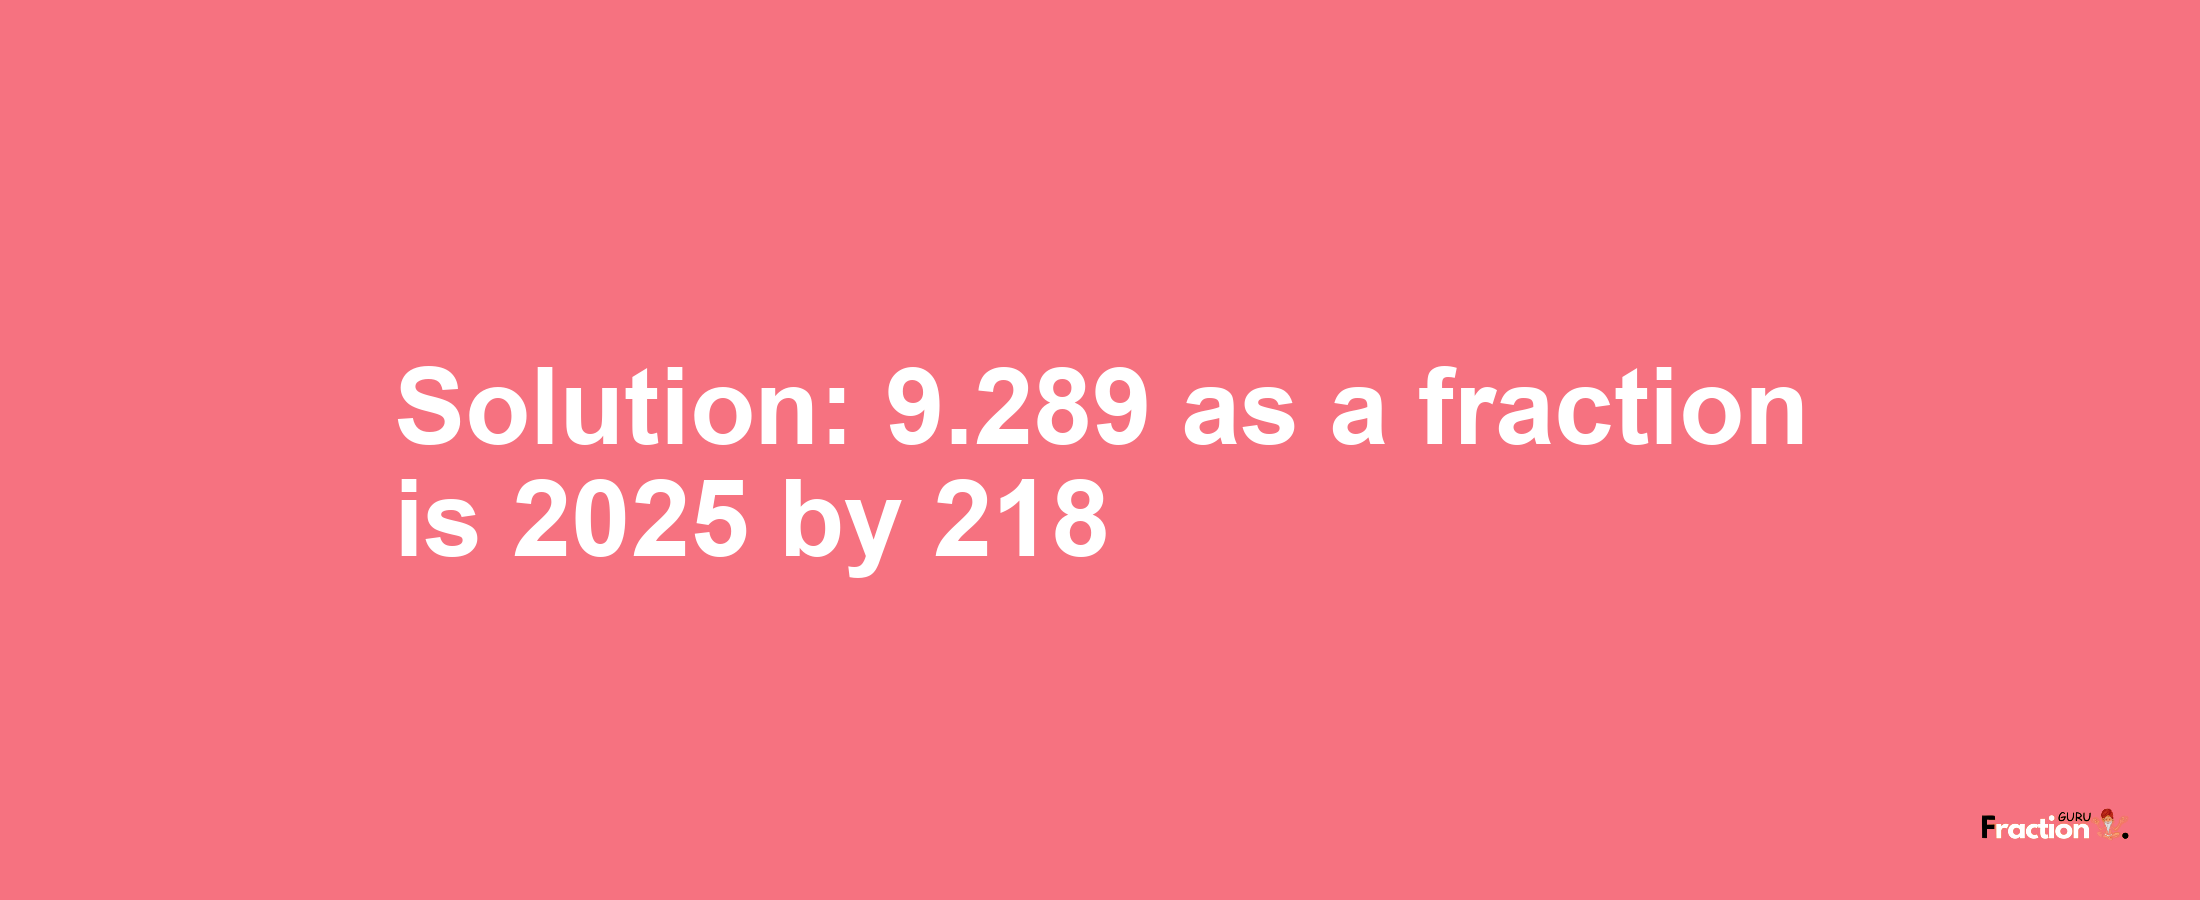 Solution:9.289 as a fraction is 2025/218